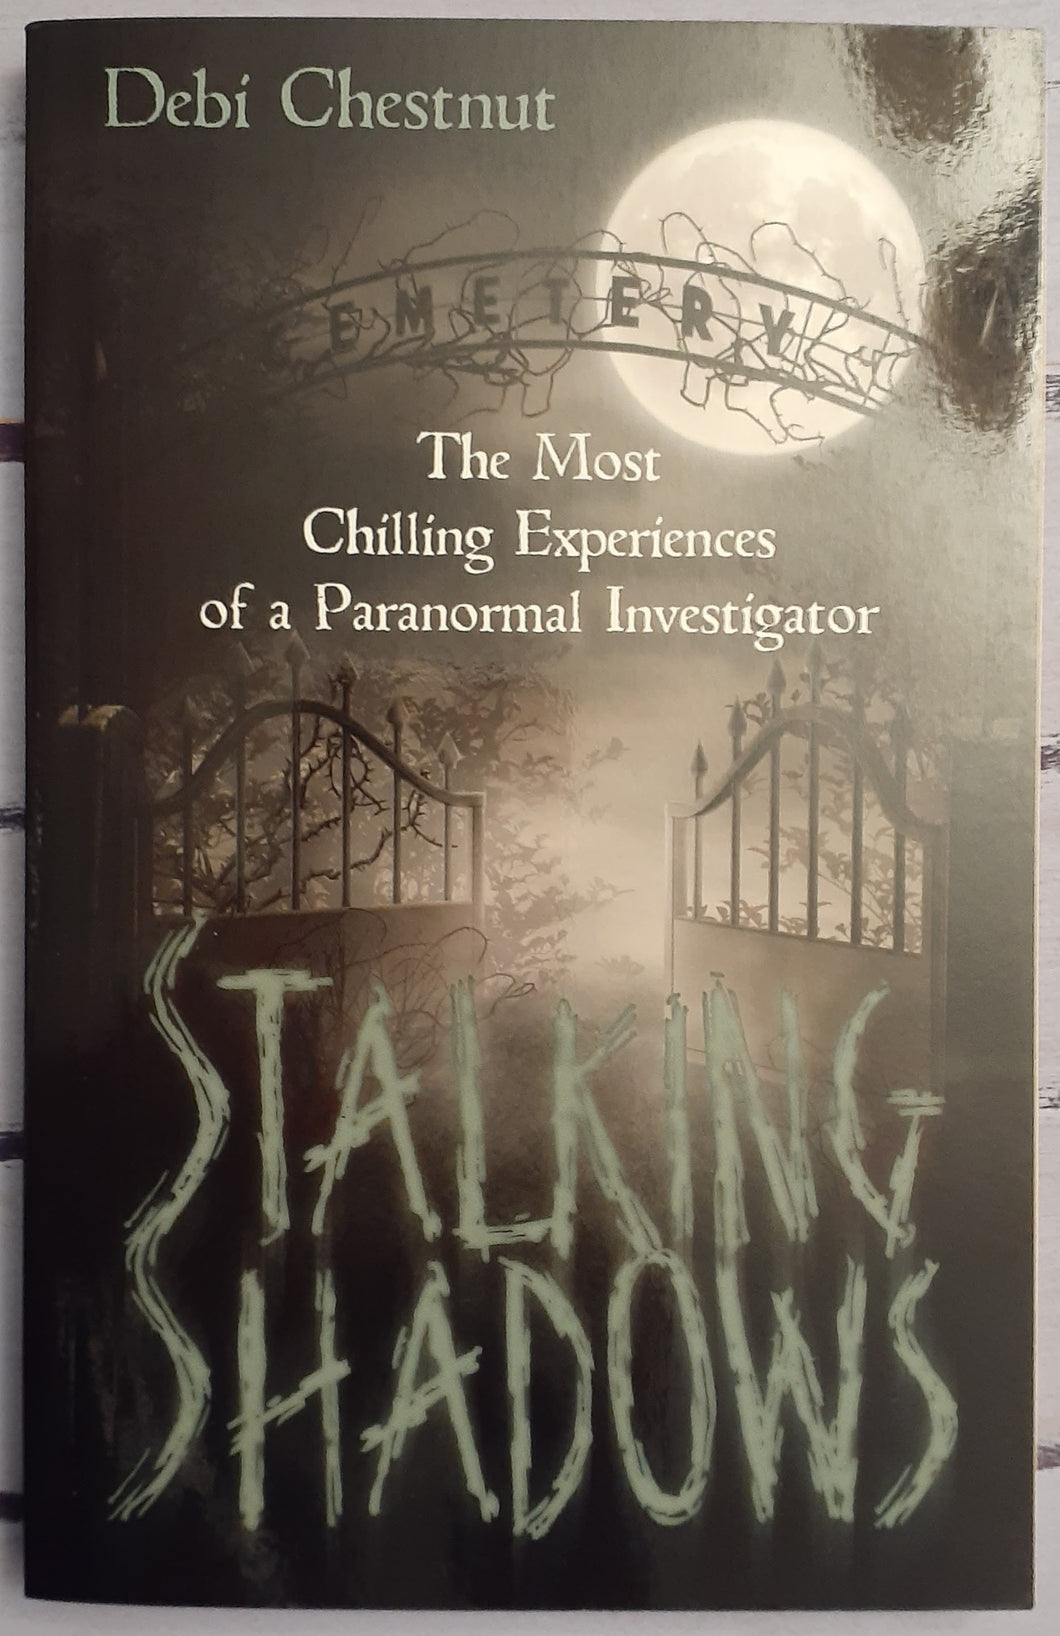 Stalking Shadows: The Most Chilling Experiences of a Paranormal Investigator